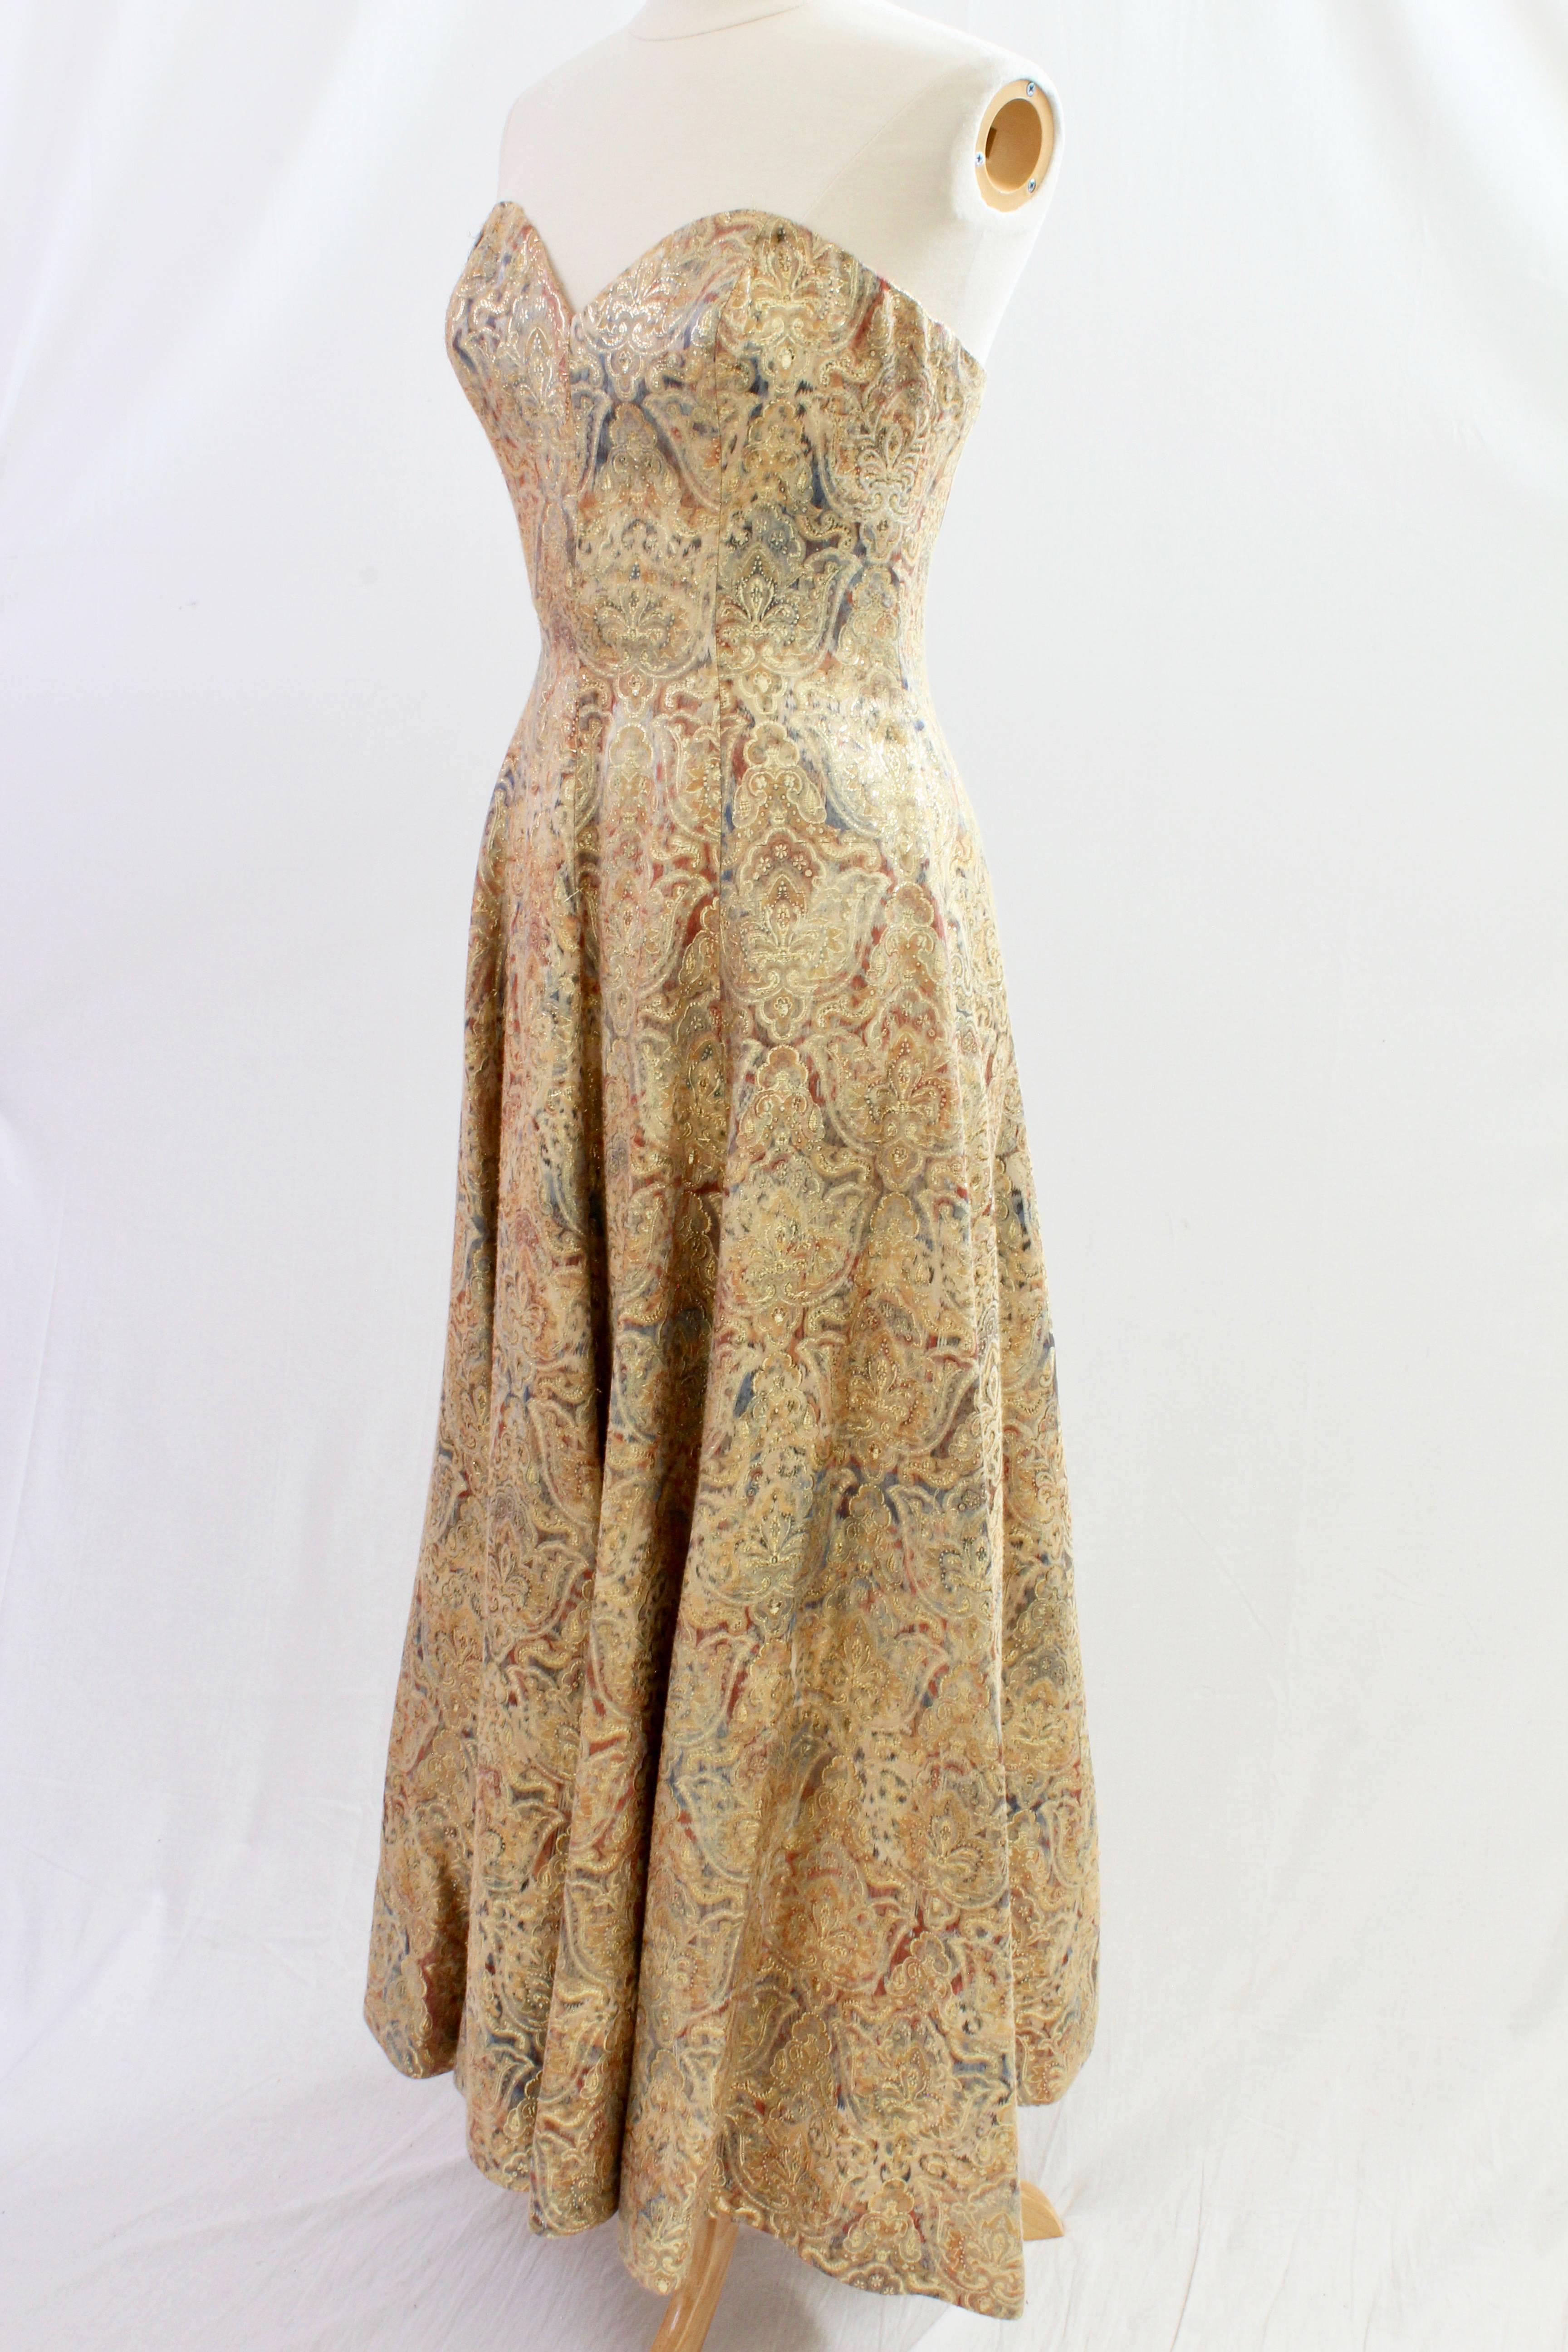 Women's Victor Costa for Neiman Marcus Gold Brocade Evening Gown Strapless Full Length 8